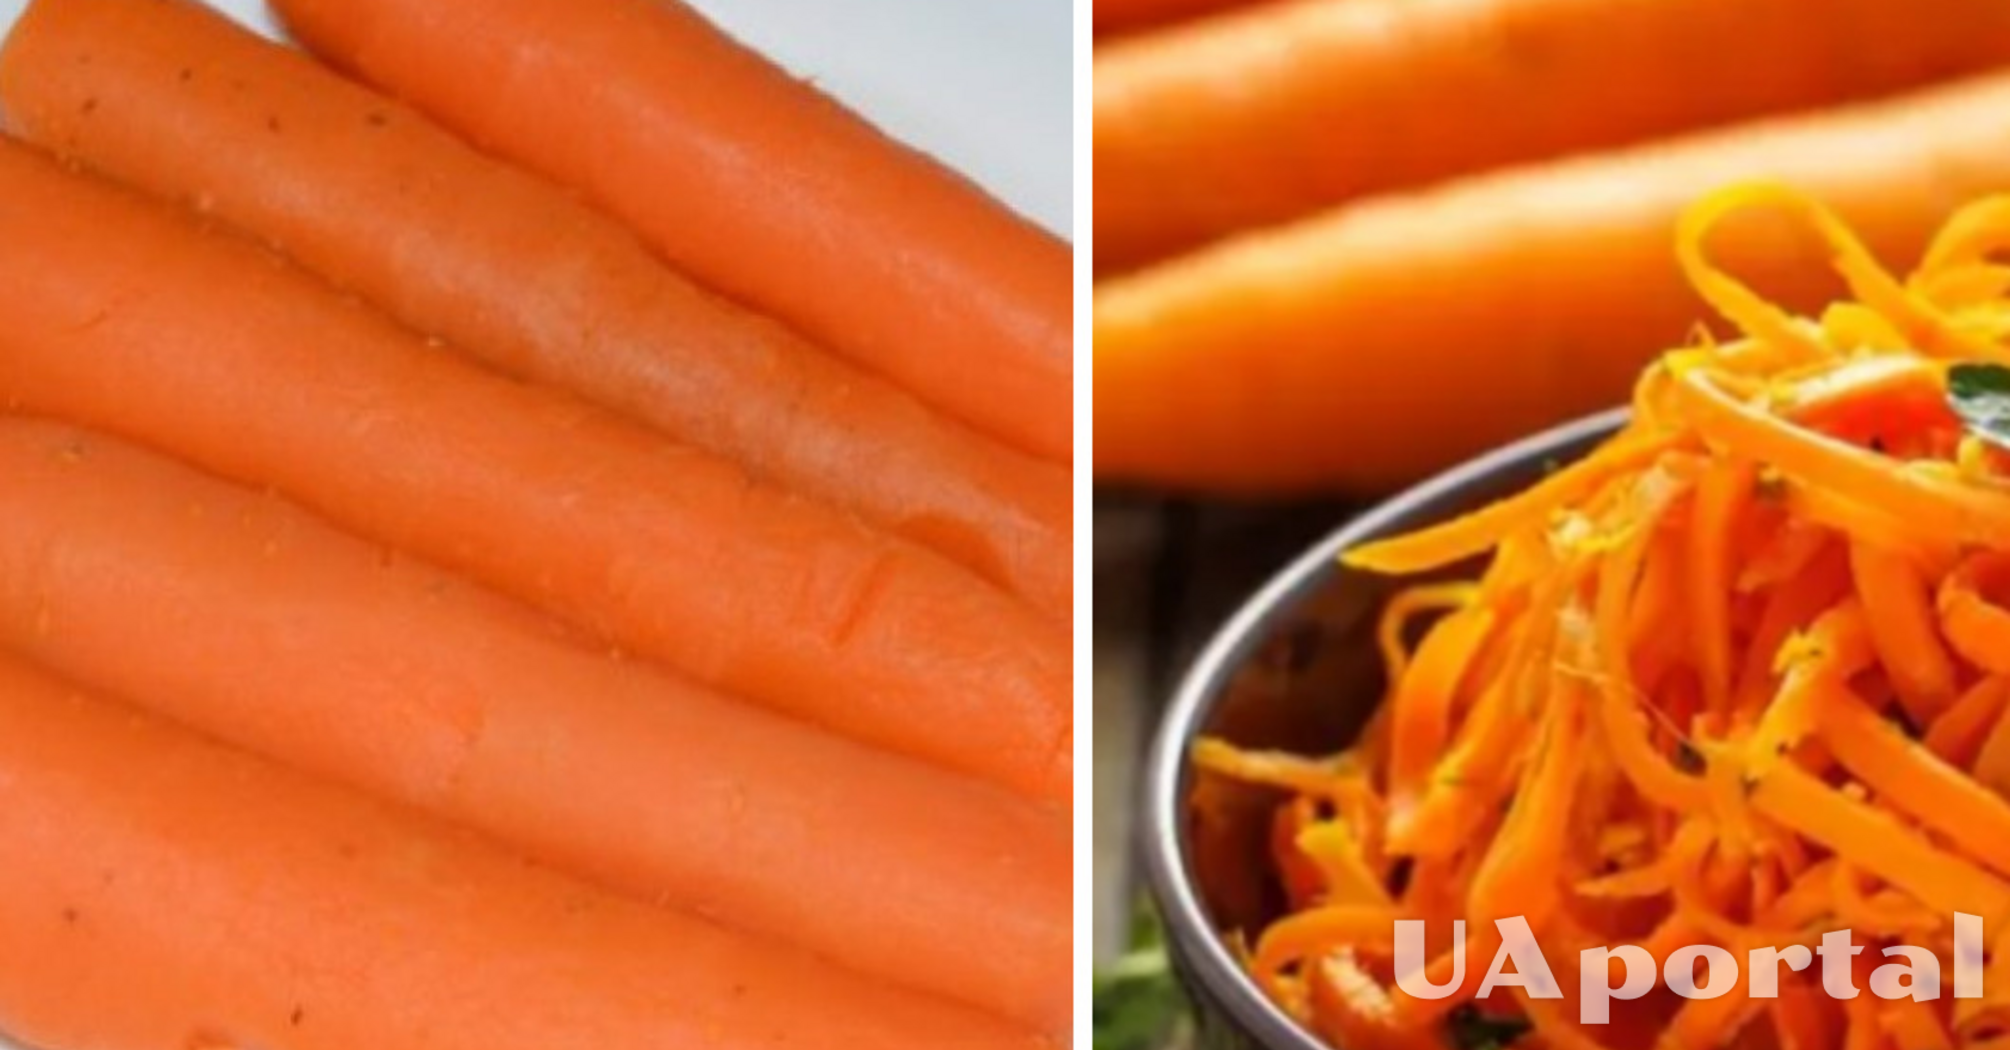 How to boil carrots in a few minutes: a useful life hack